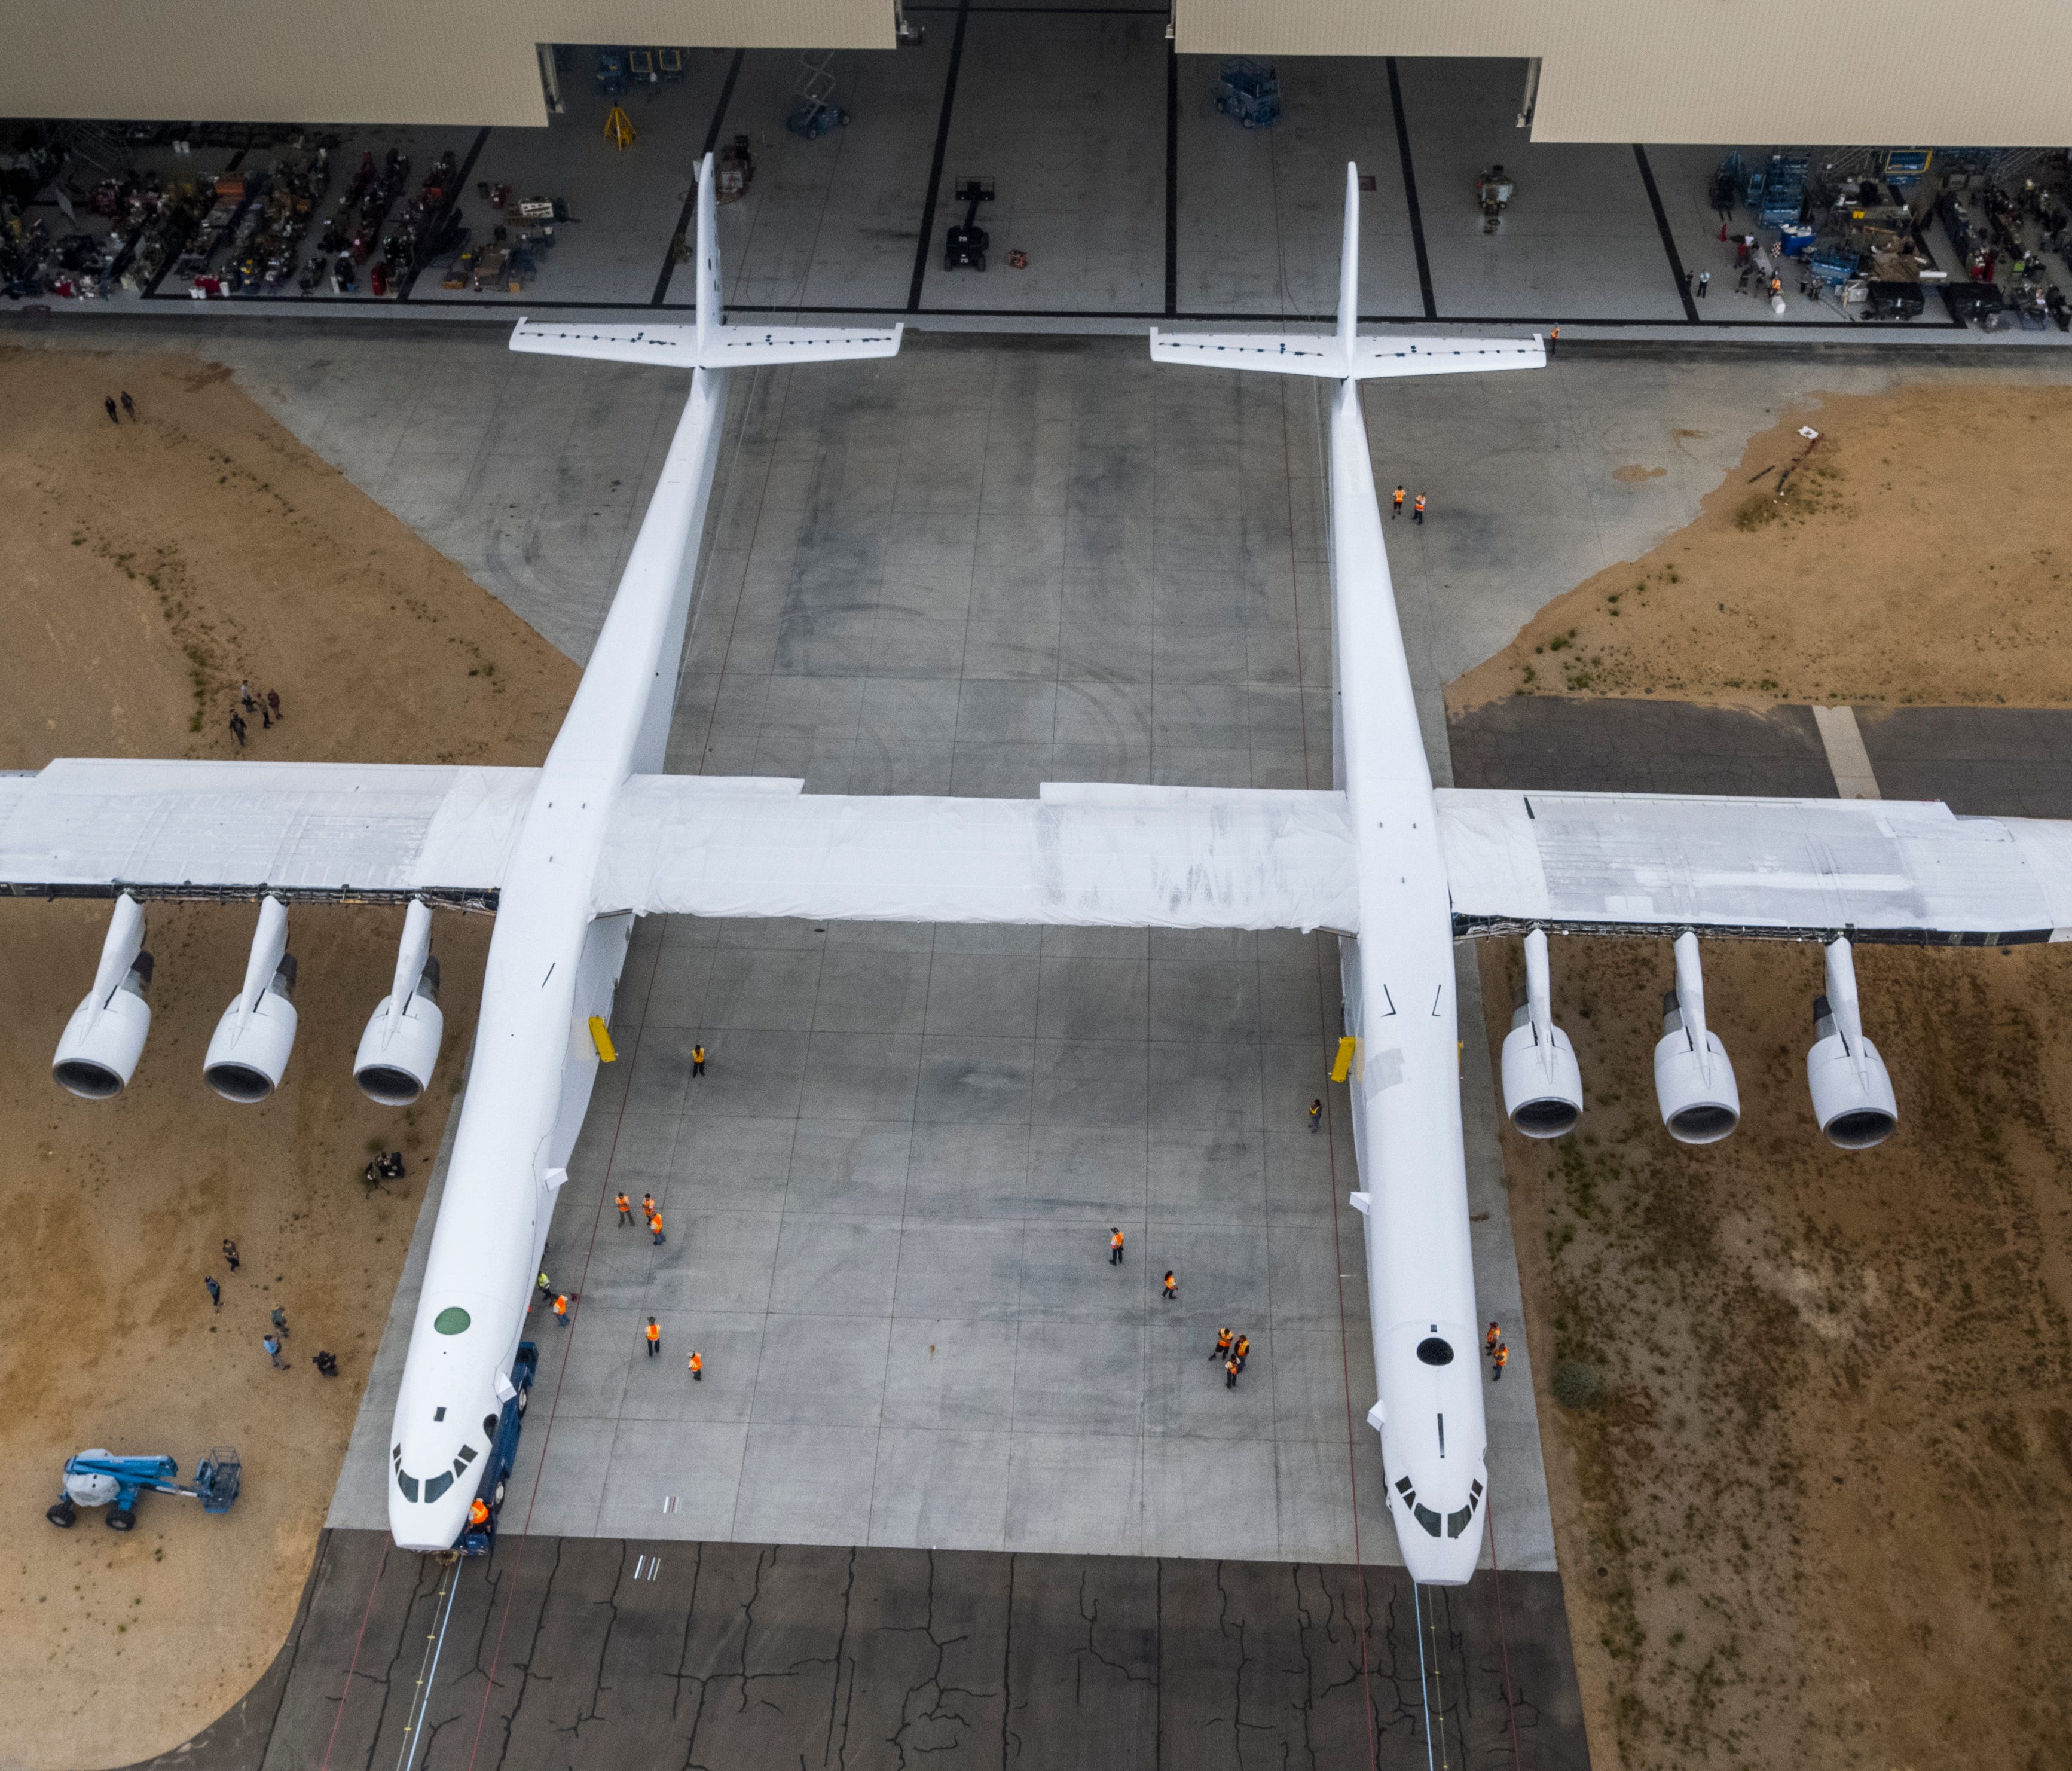 The Stratolaunch aircraft features two cockpits and six Boeing 747 engines. It's capable of carrying payloads up to 550,000 pounds.